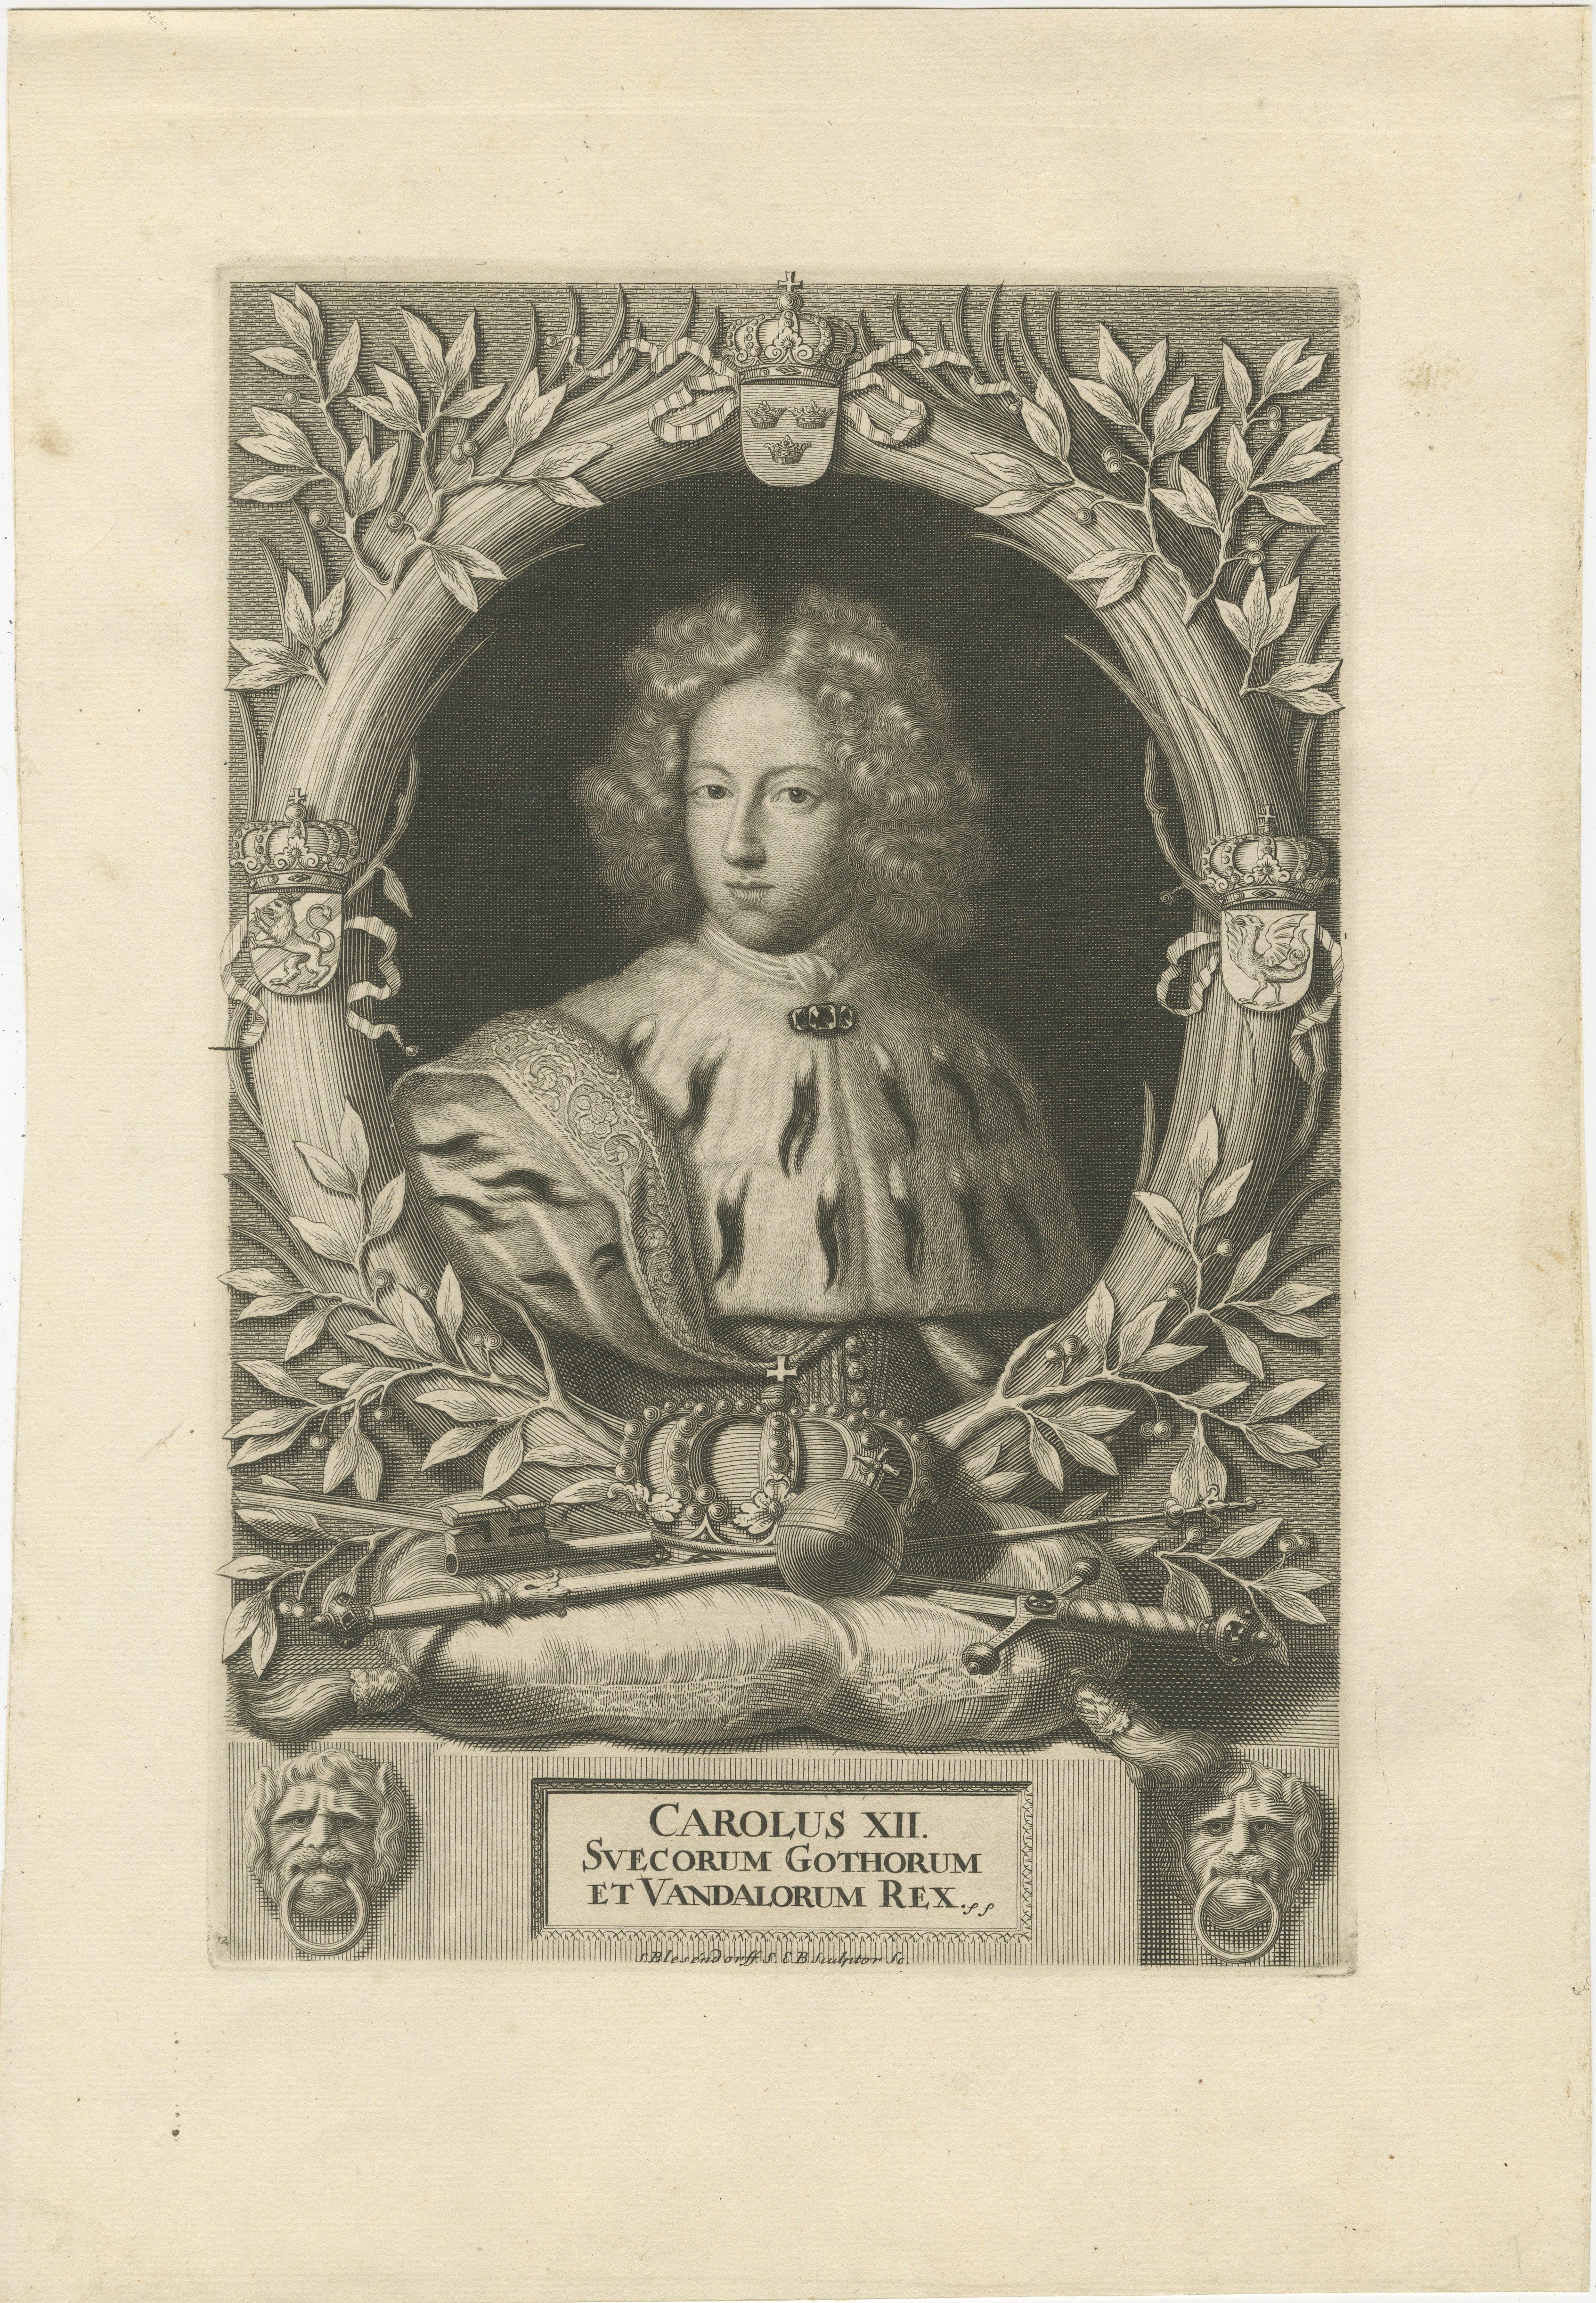 This is an original antique print that  features an intricate engraving from 1698, depicting Charles XI, the King of Sweden, titled 